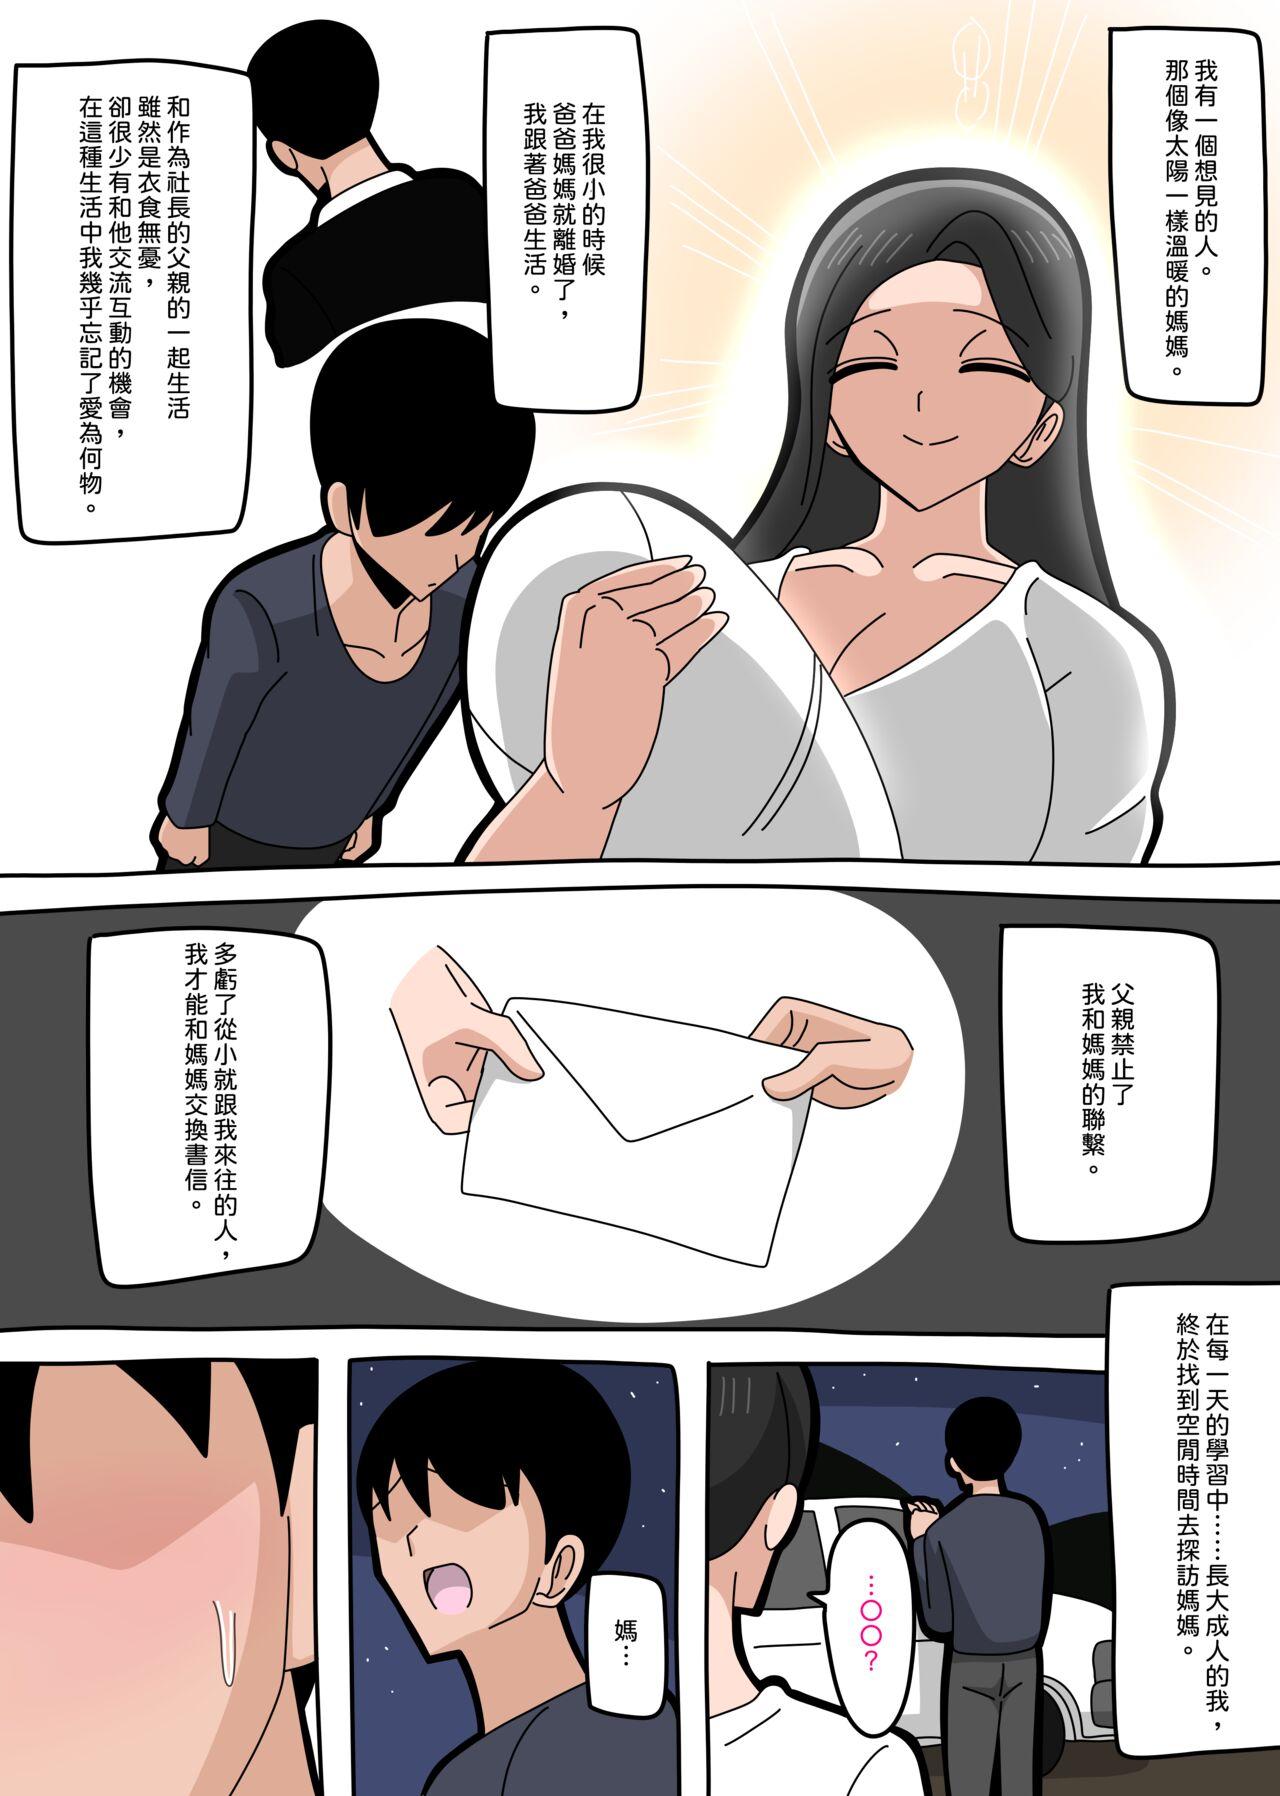 Pendeja [18master] 2023-5-24 Meeting mom again after a long separation | 與媽媽重逢… [Chinese][興趣使然的個人機翻] - Original Lezdom - Picture 1